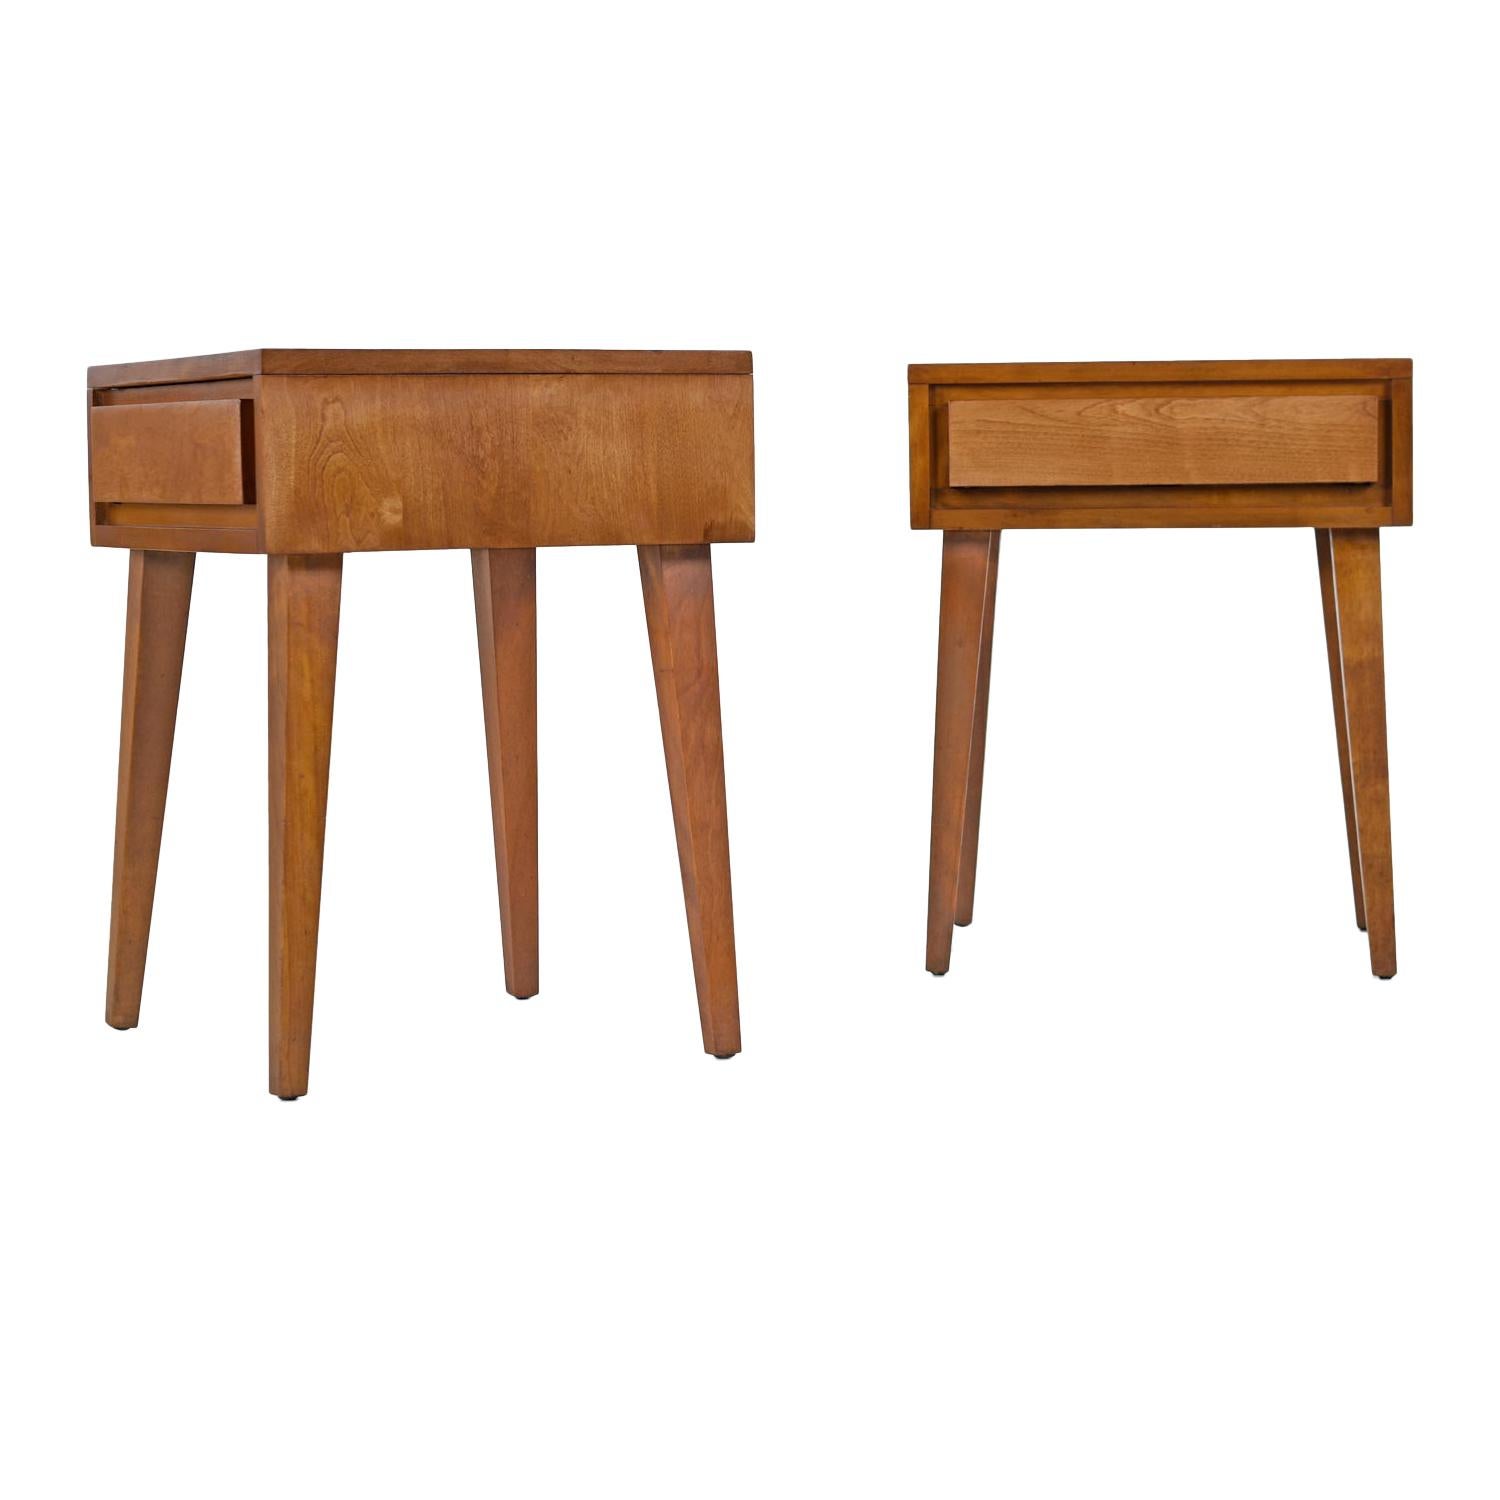 Pair of Mid-Century Modern nightstands / end tables designed by 20th century American furniture luminary Leslie Diamond. Constructed of solid birch wood with architectural clean lines. This is a handsome piece from Conant Ball’s Modernmates